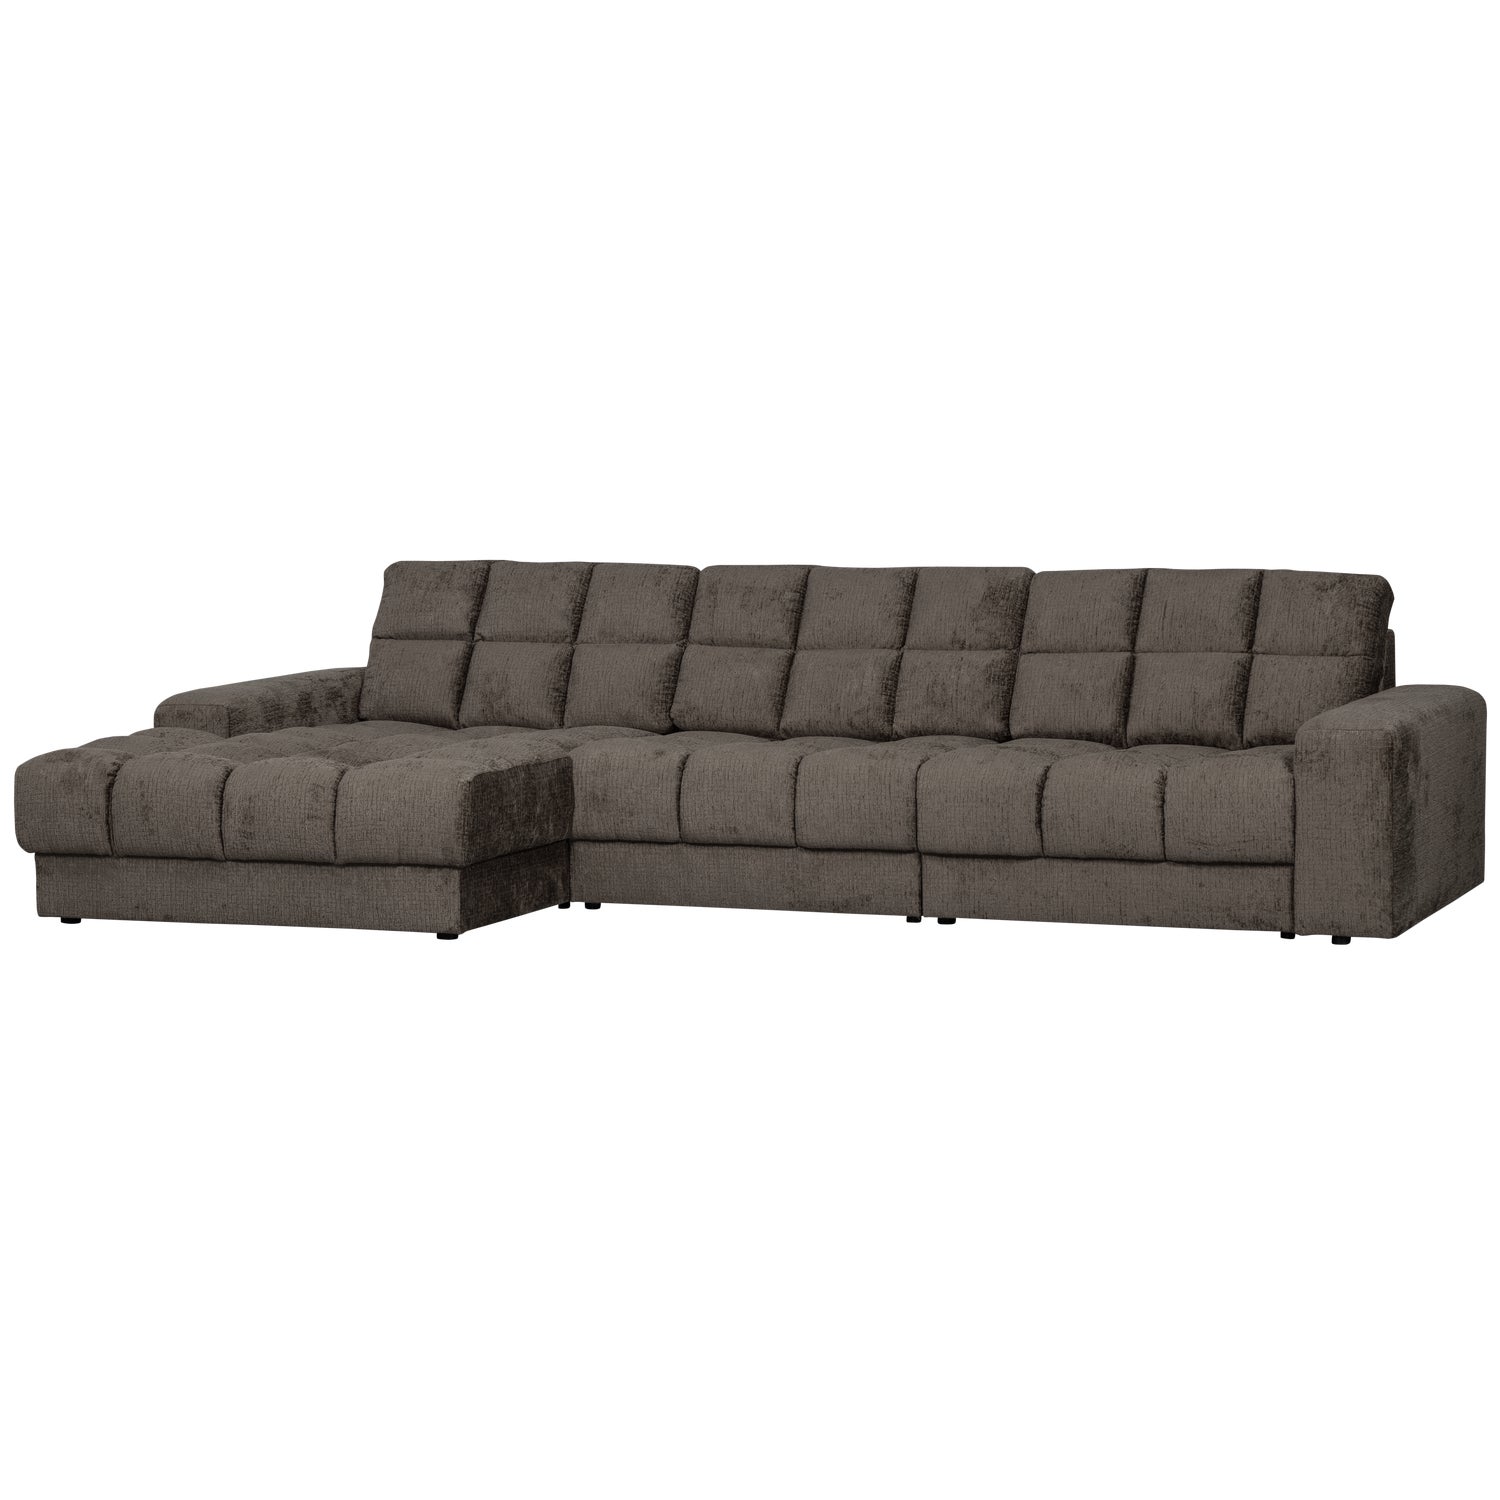 379012-MO-02_VS_WE_Second_date_chaise_longue_links_structure_velvet_mountain_SA.png?auto=webp&format=png&width=1500&height=1500